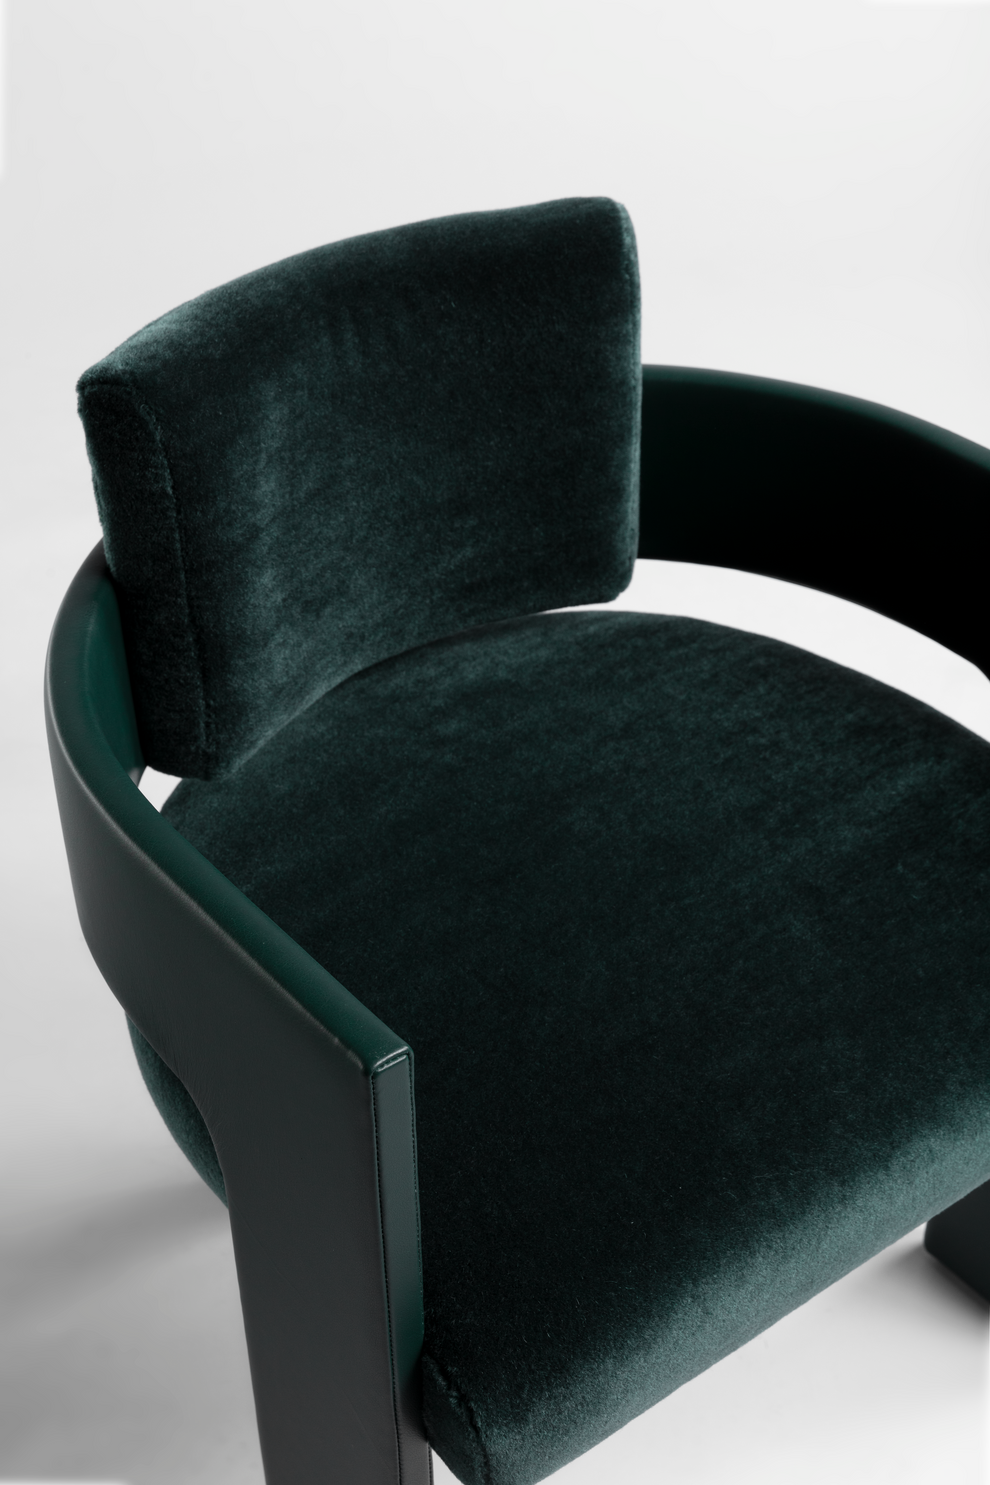 Shown in Pine Green Leather frame with Pine Green Mohair cushions